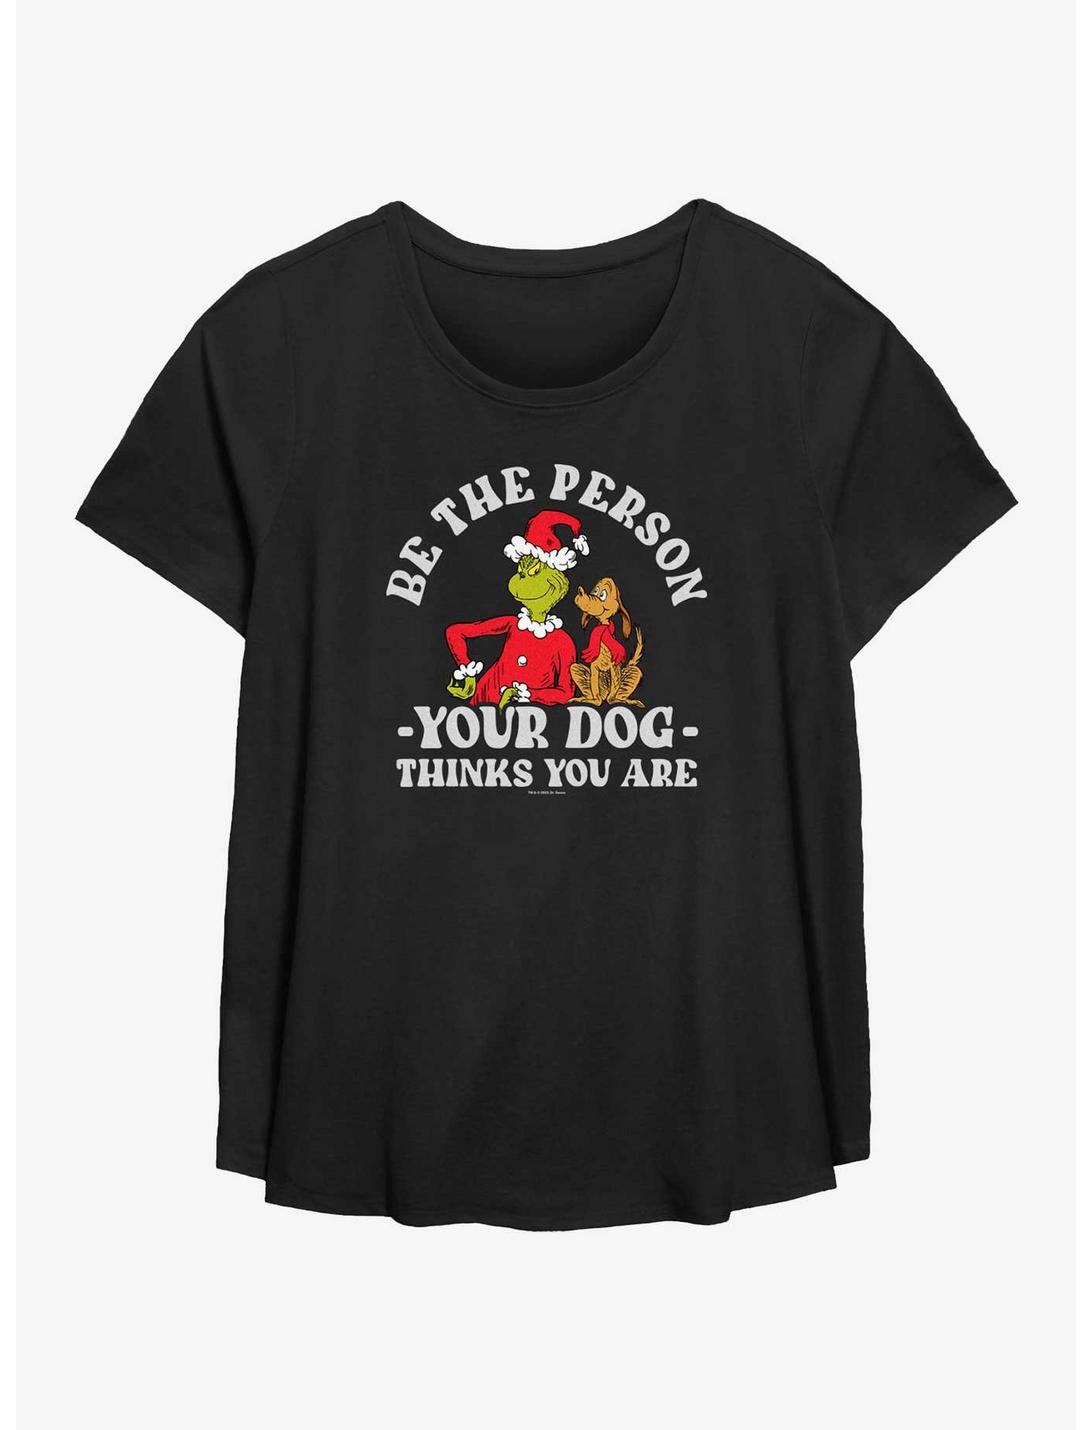 Dr. Seuss How The Grinch Stole Christmas Your Dog Thinks You Are Girls T-Shirt Plus Size, BLACK, hi-res